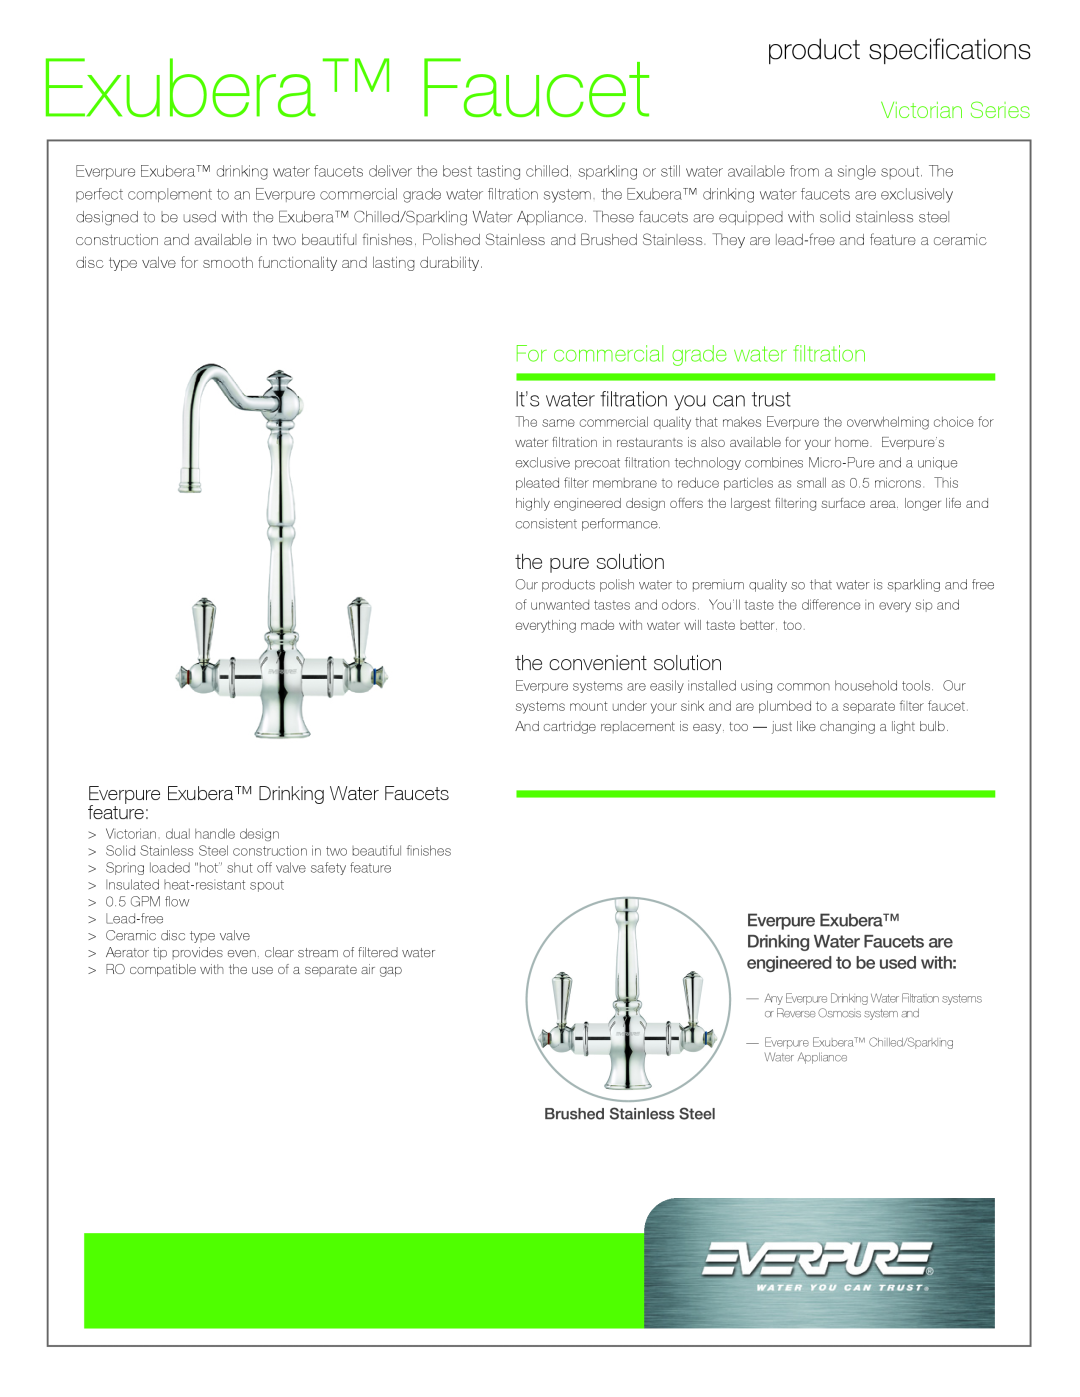 Everpure EV9006-31 manual Exubera Faucet, Victorian Series, For commercial grade water filtration, the pure solution 